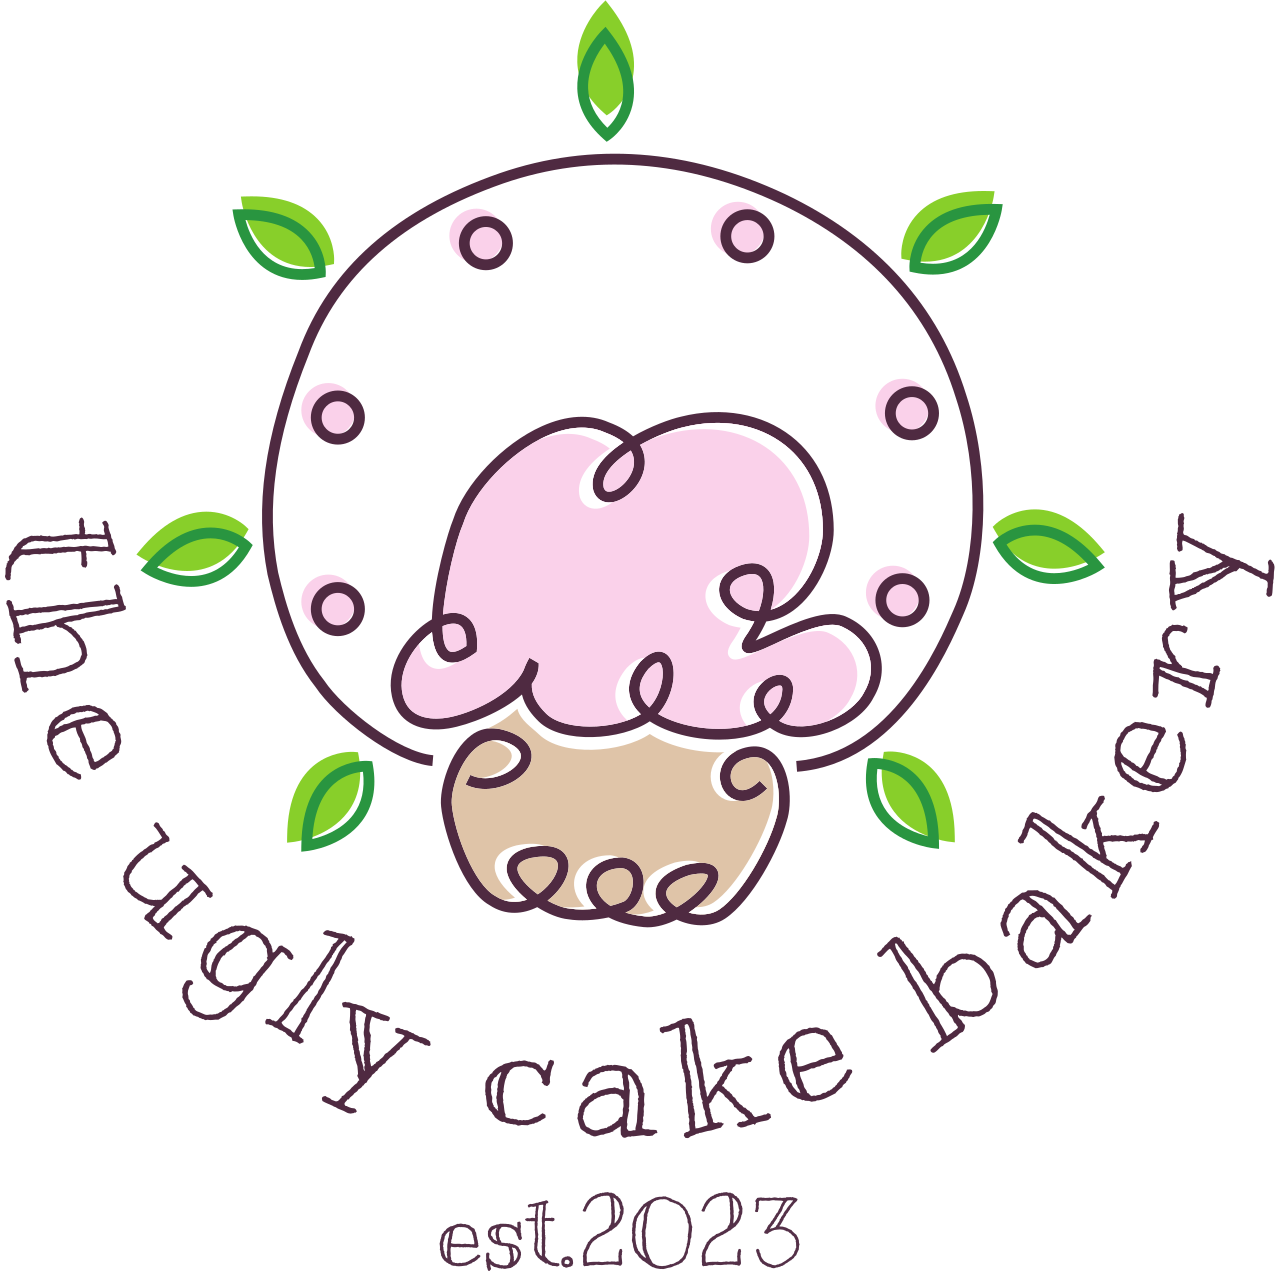 the ugly cake bakery's web page